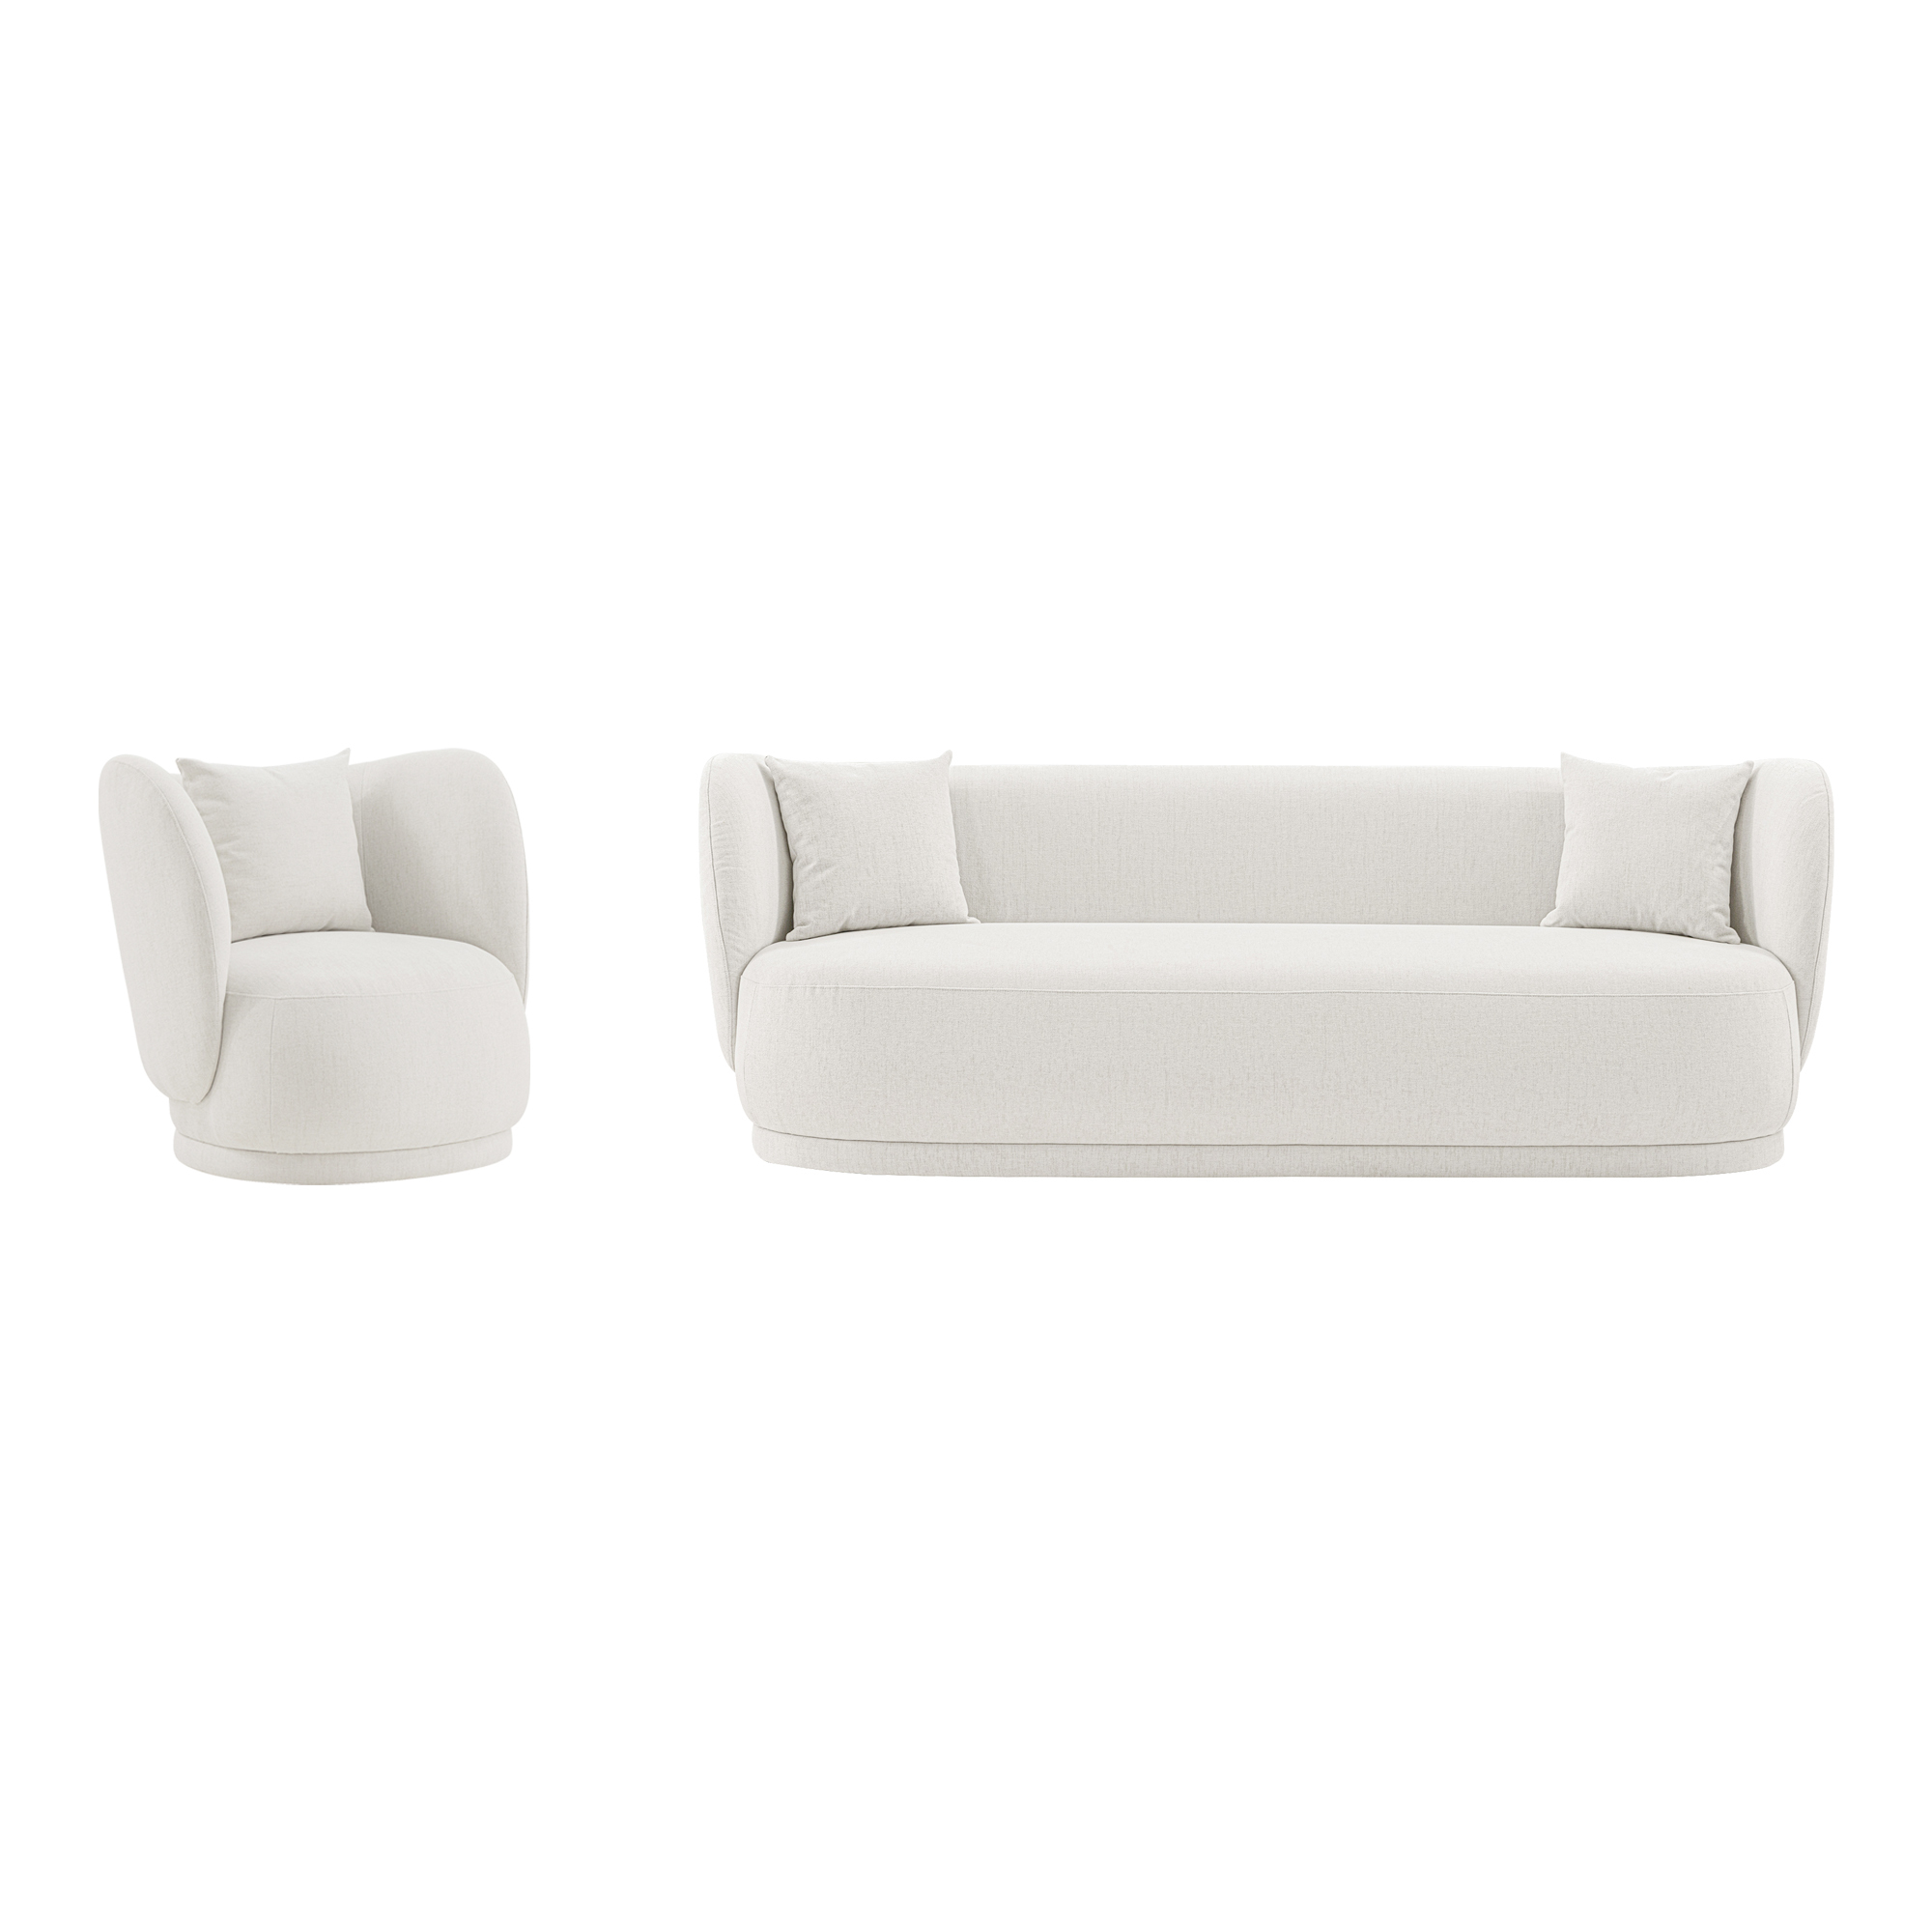 Manhattan Comfort, Contemporary Siri Sofa and Accent Chair Set Cream, Primary Color Cream, Included (qty.) 2 Model 2-SFAC5710